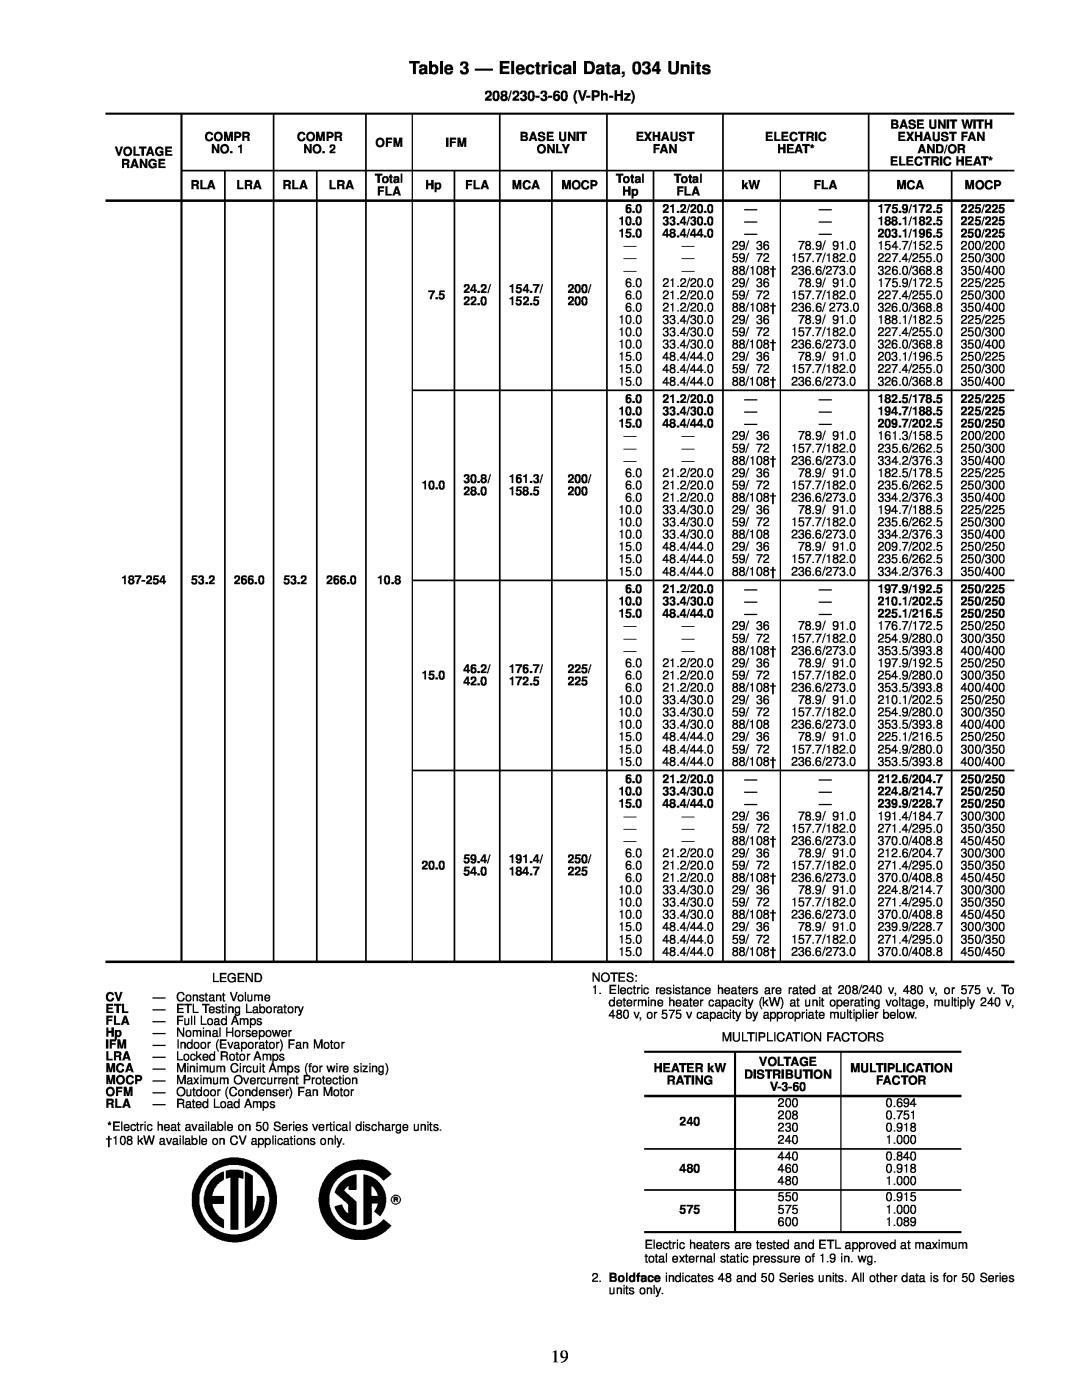 Carrier NP034-074 specifications Ð Electrical Data, 034 Units, 208/230-3-60 V-Ph-Hz 